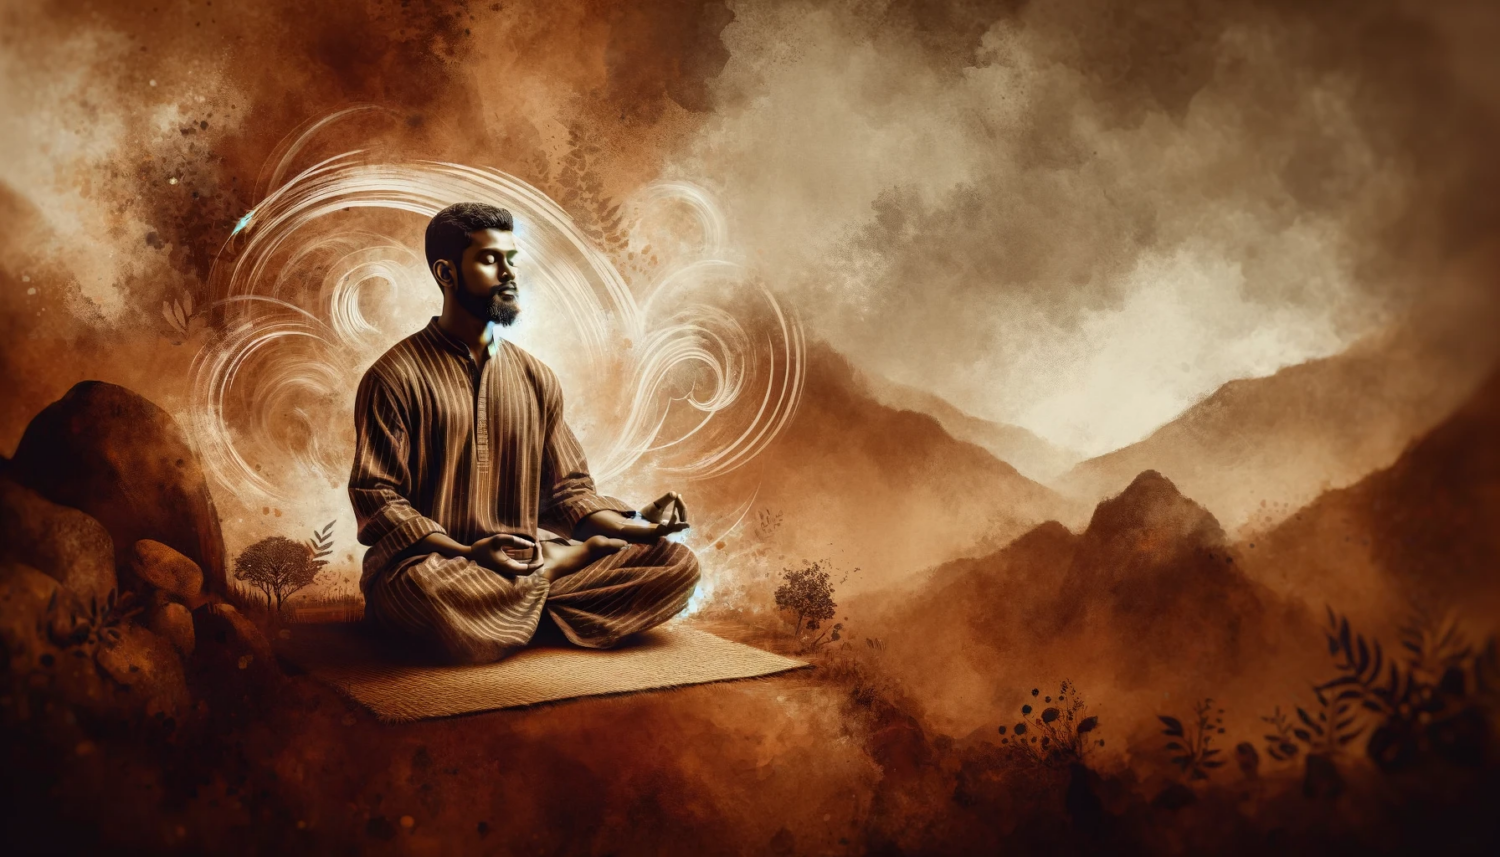 Create a banner-sized image featuring a man meditating in a scene with an overall brownish hue. The man, of South Asian descent, sits in a classic meditation pose on a rustic, earth-toned mat. His attire is simple and traditional, resonating with the theme of mindfulness and tranquility. The background should be a serene landscape, subtly blending shades of brown, beige, and soft amber, evoking a sense of peace and introspection. Surrounding the man are gentle swirls of mist, symbolizing the release of stress and the attainment of inner harmony. The image should convey a deep sense of calm and connection with the inner self.